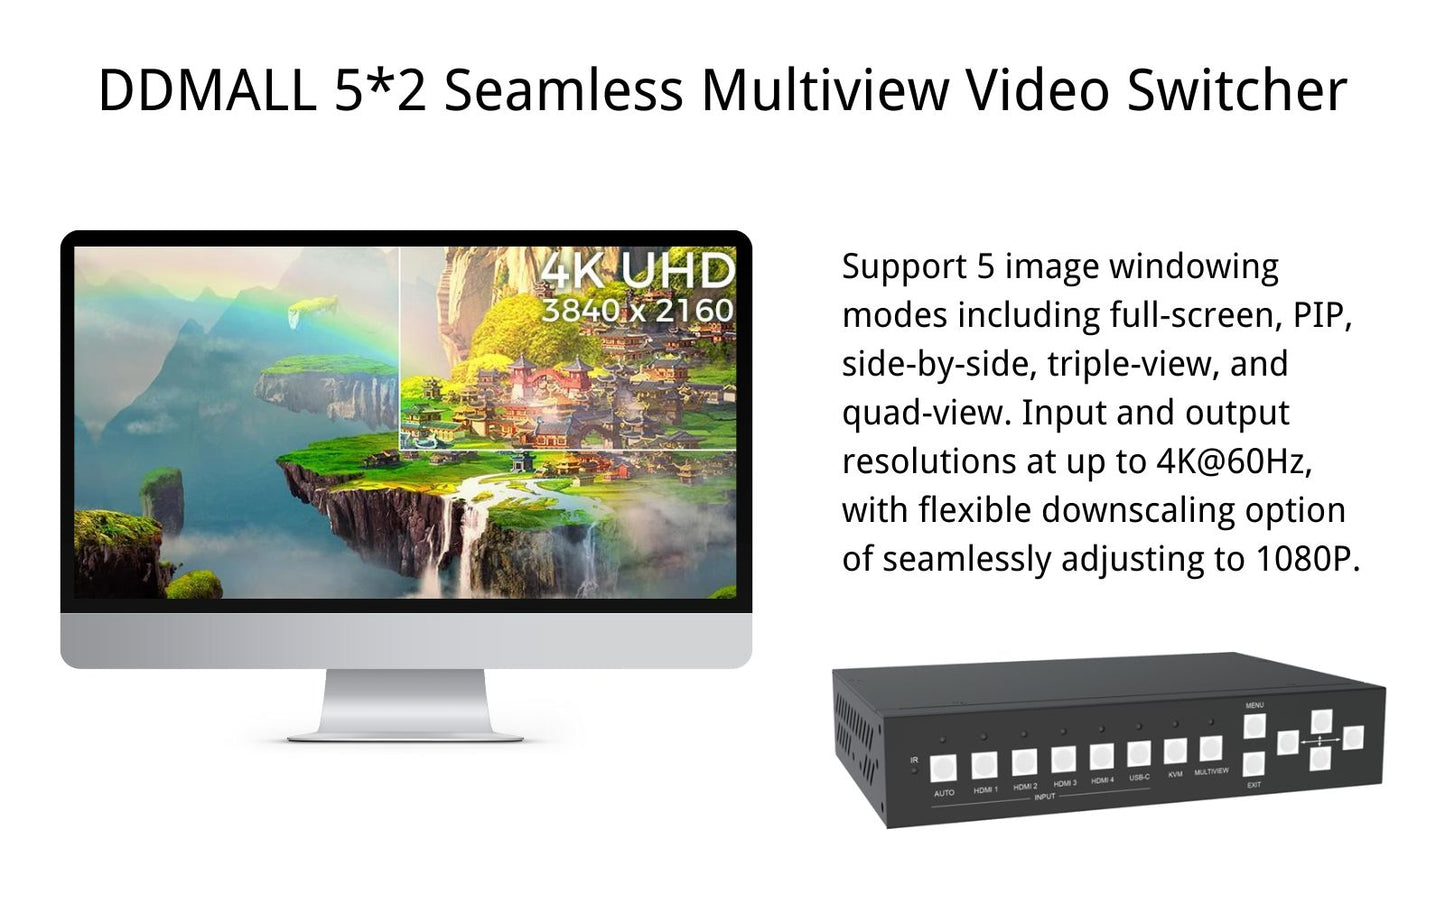 DDMALL AGS-KVM512 5IN 2OUT 4K Seamless HDMI Video Switcher for Multi-window Display